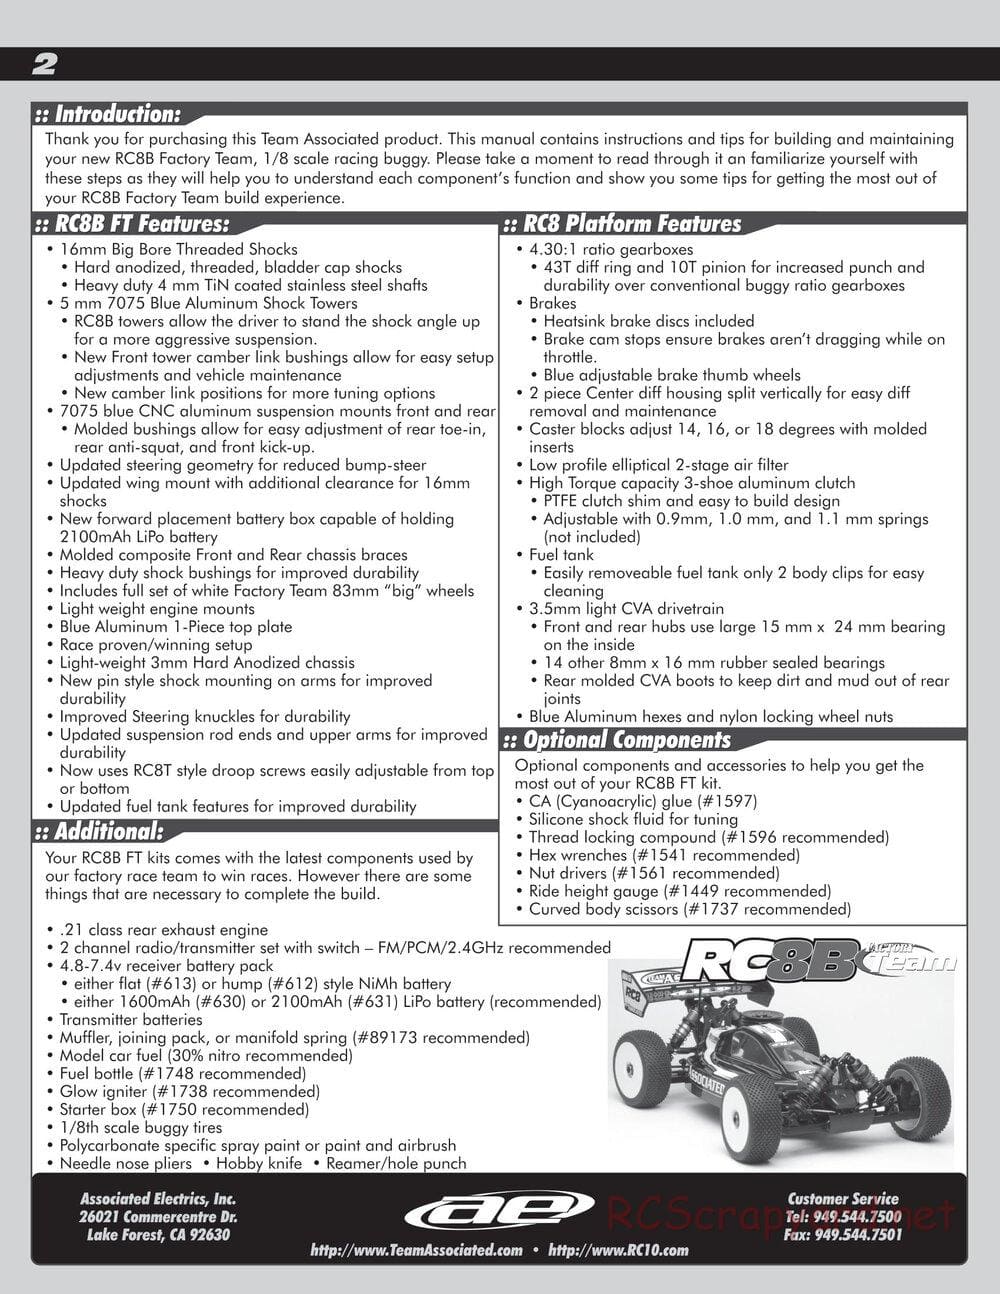 Team Associated - RC8B Factory Team - Manual - Page 2